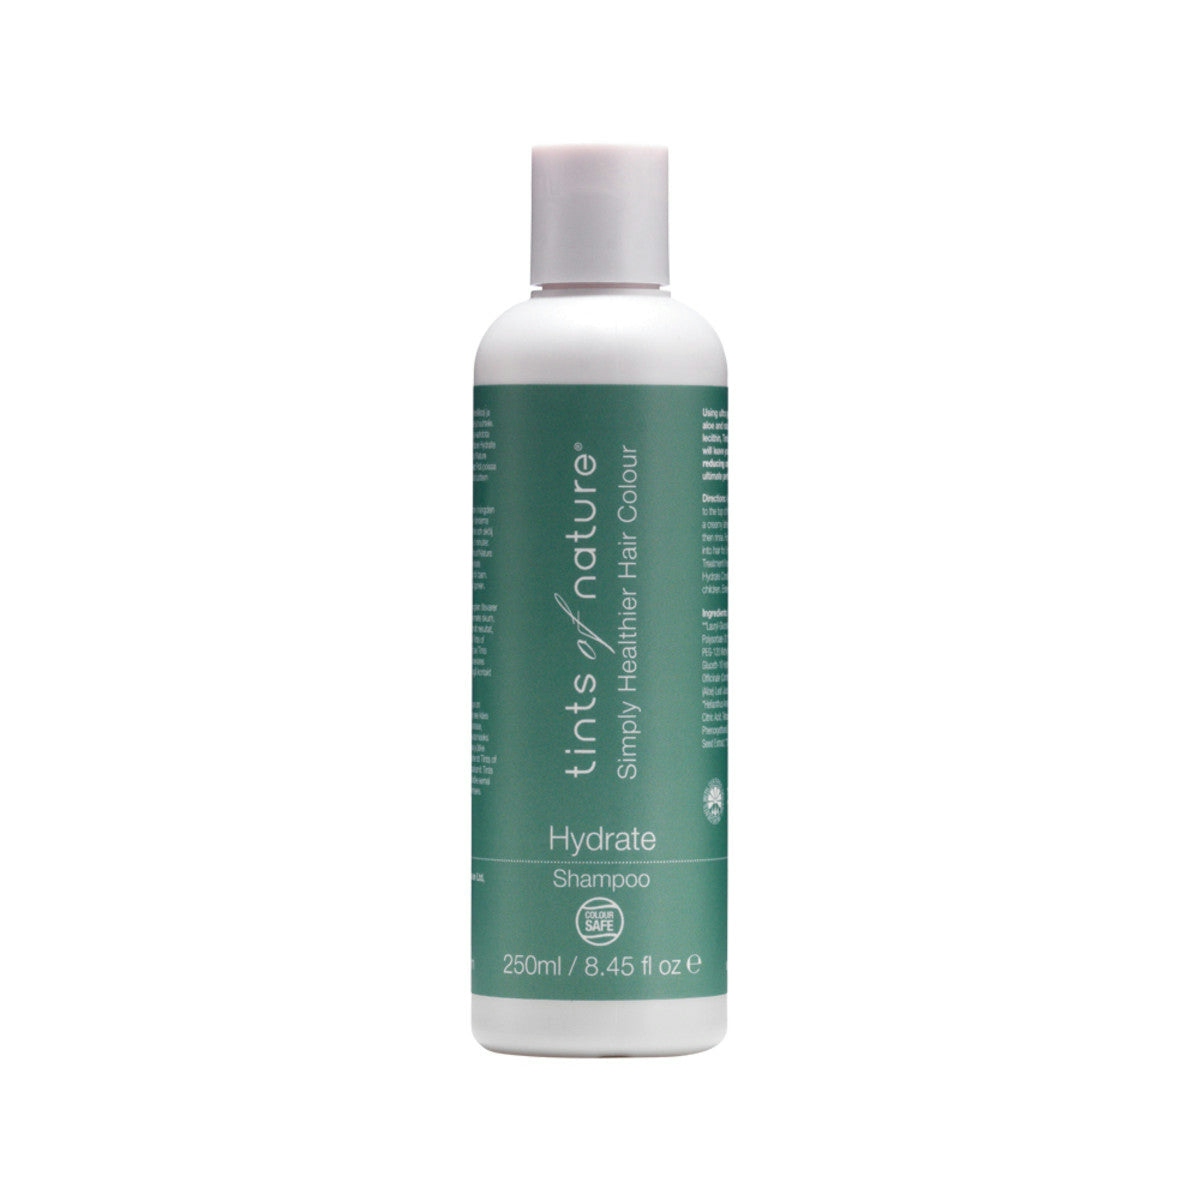 image of Tints Of Nature Shampoo Hydrate 250ml on white background 